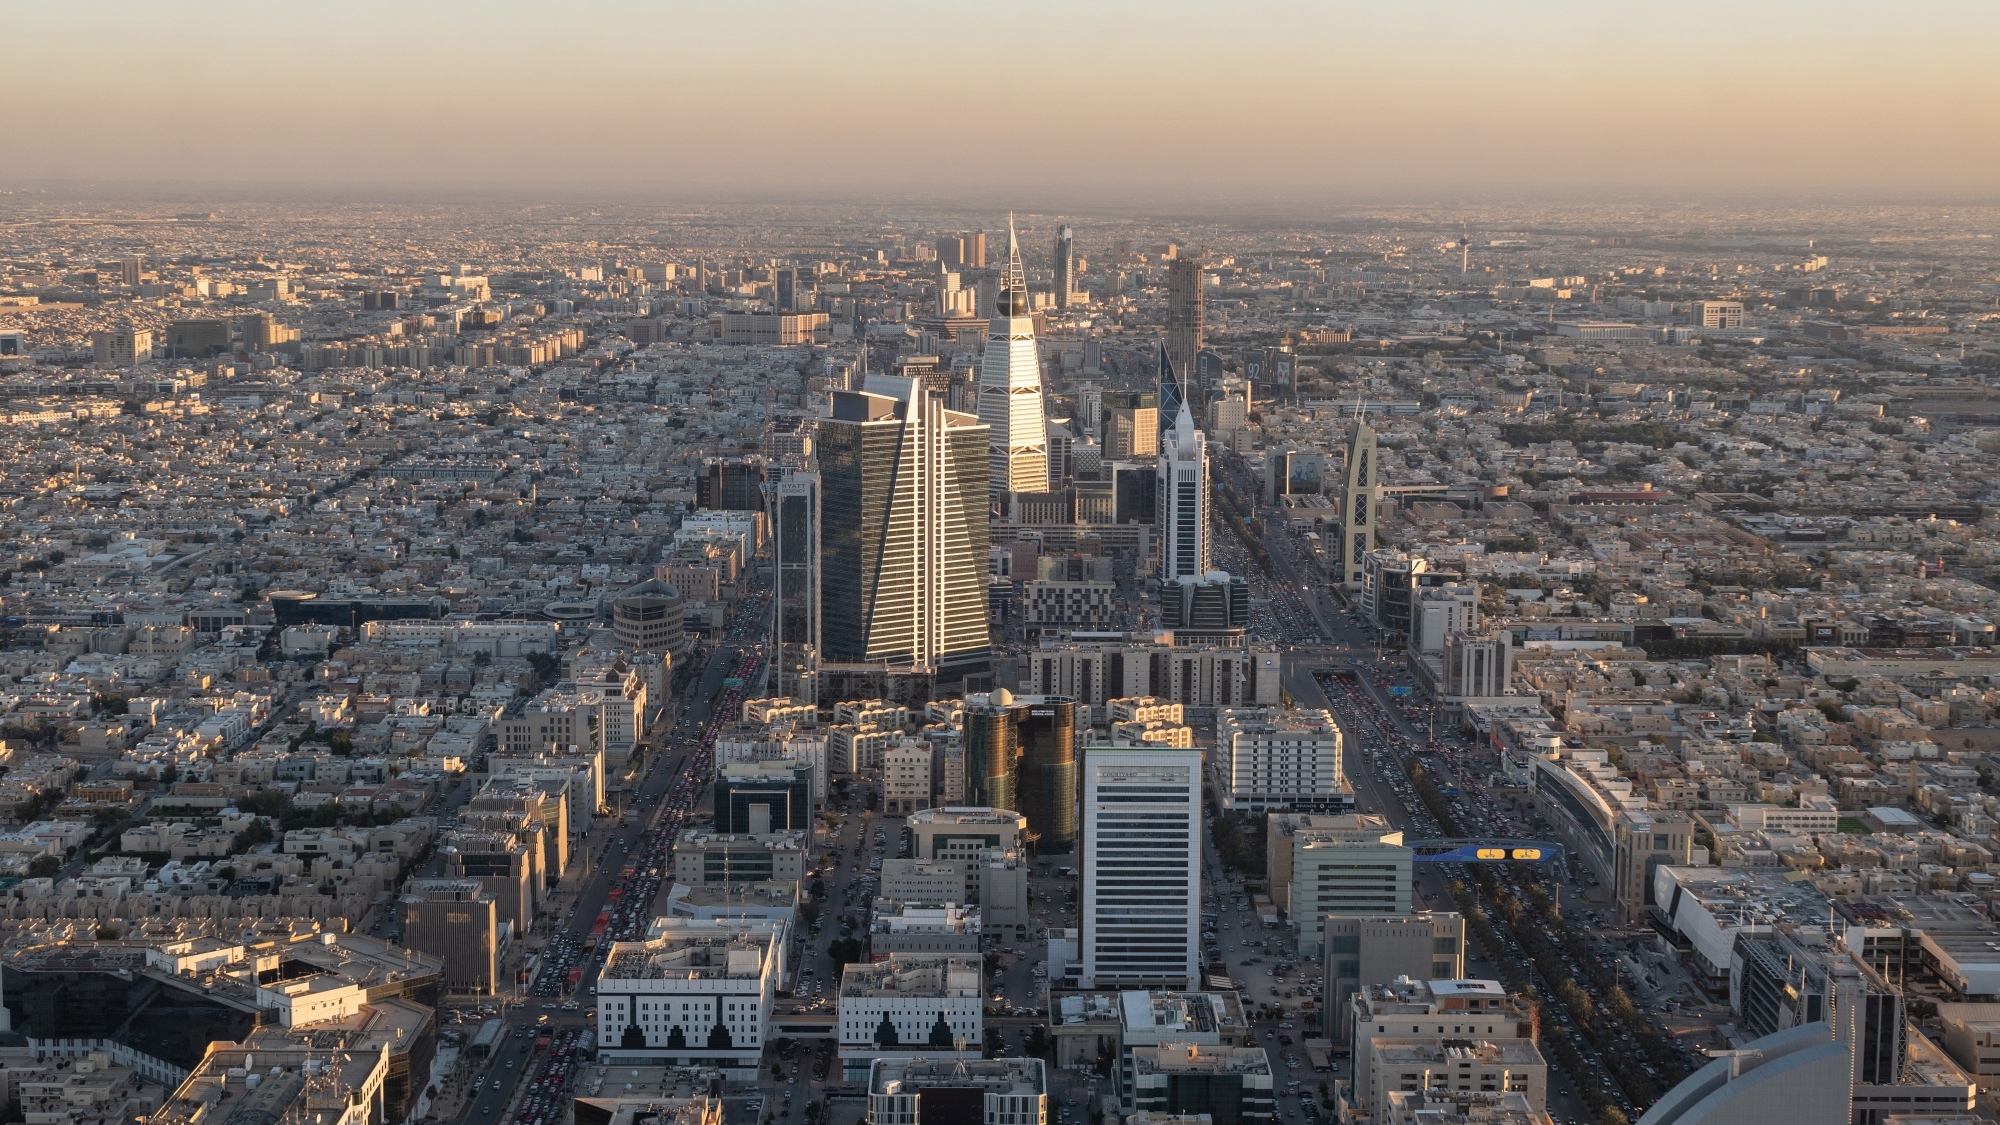 Riyadh's spending spree turn the Saudi capital into a global magnet, drawing businesses eager to capitalize on lucrative opportunities. 

Image Source: Bloomberg 